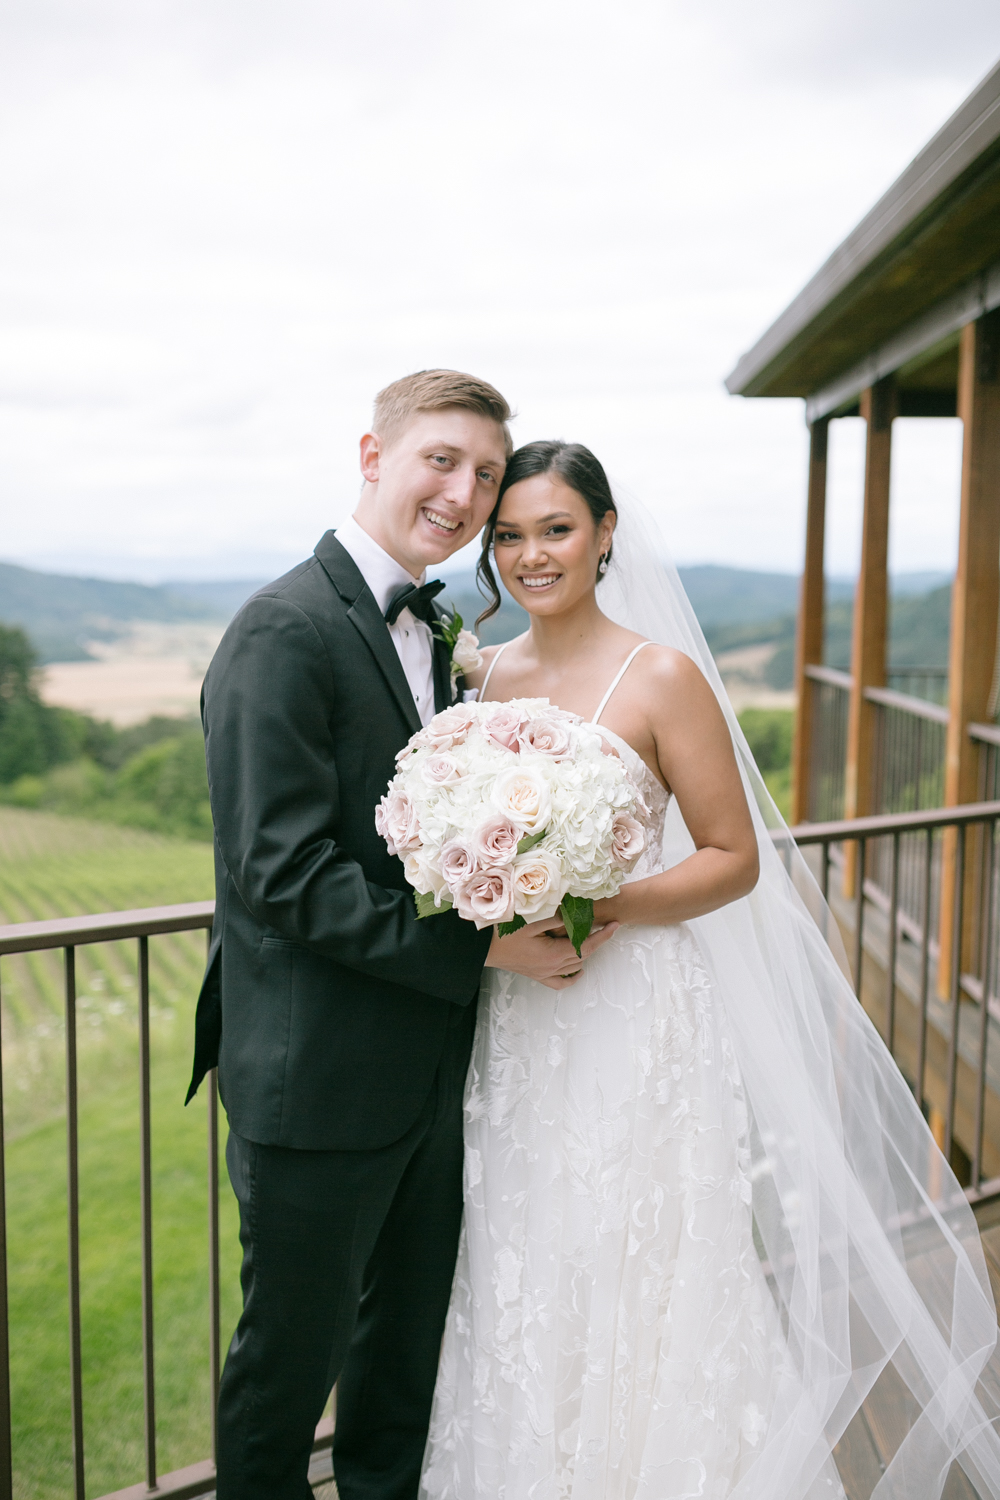 Youngberg Hill Vineyard Wedding in Wine Country Oregon - Corrie Mick Photography-178.jpg